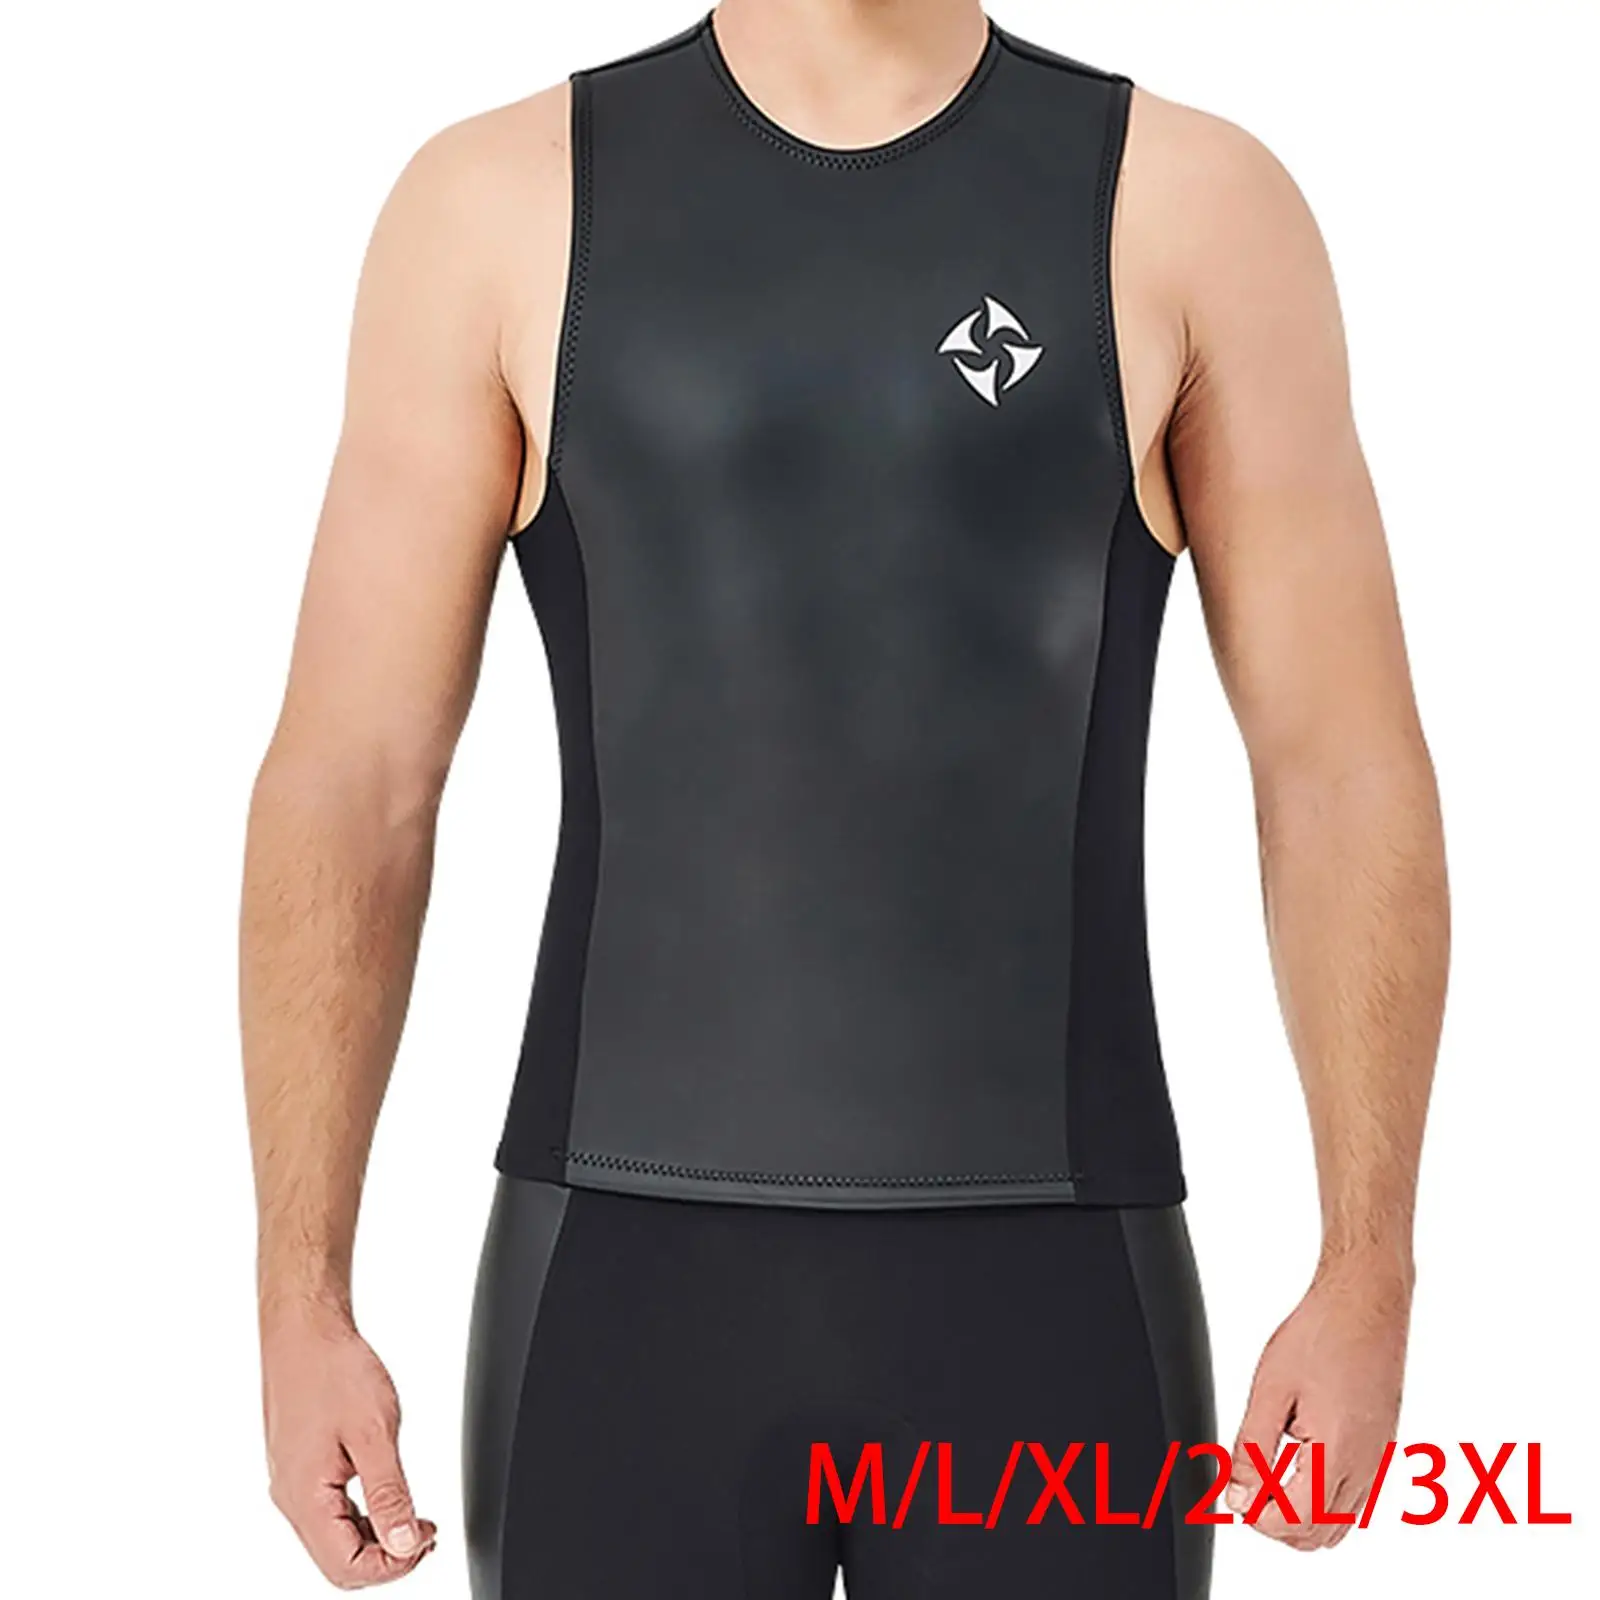 2MM Neoprene Wetsuit Vest Jacket Sleeveless Warm Wetsuits Top Mens for Cold Water Diving Surfing